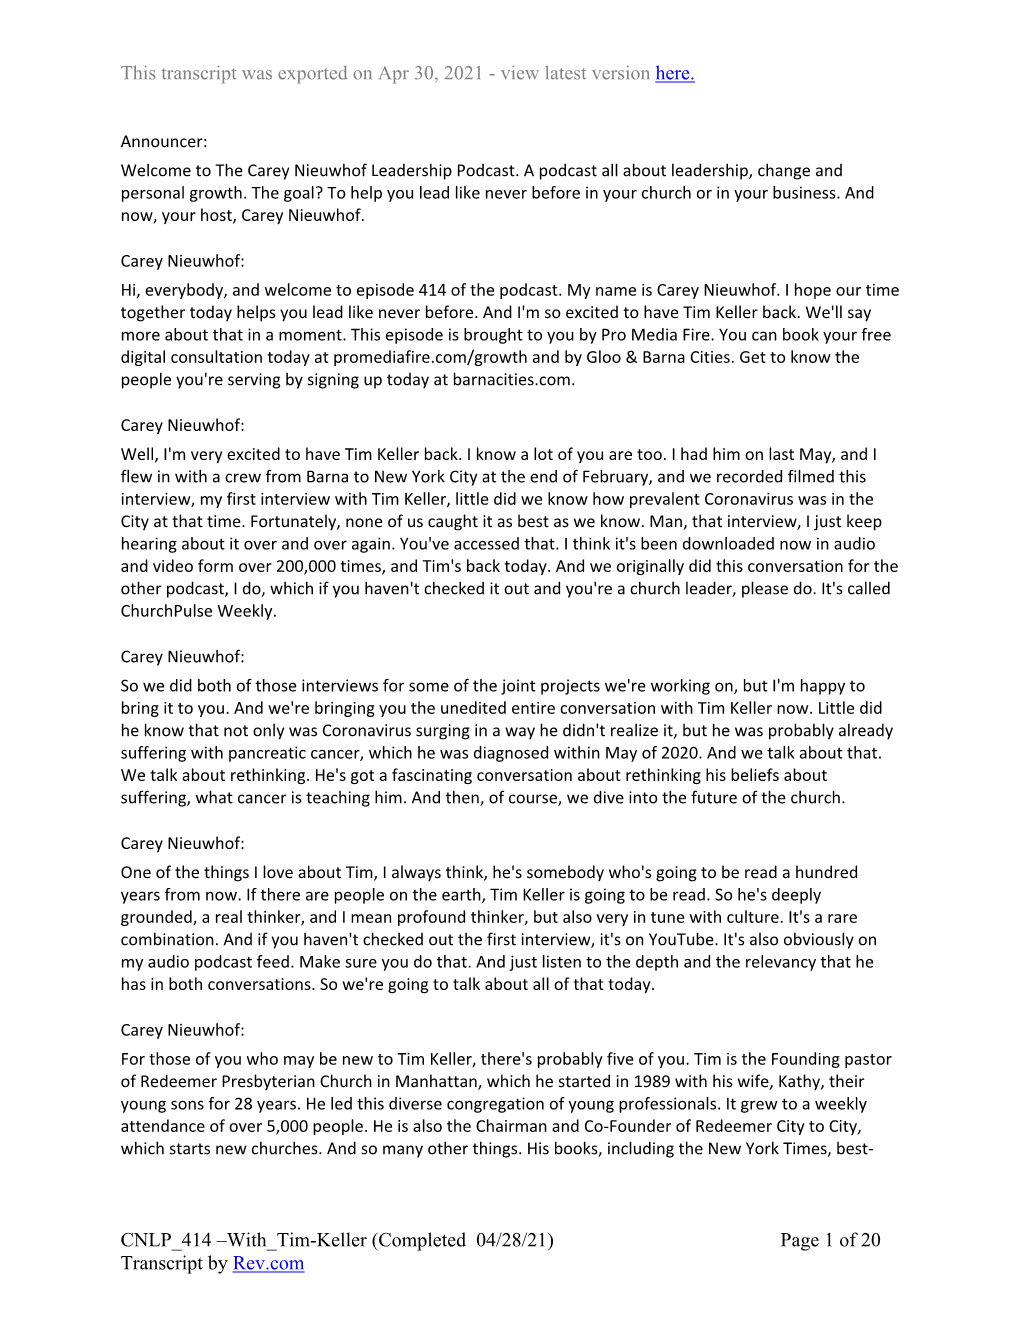 With Tim-Keller (Completed 04/28/21) Page 1 of 20 Transcript by Rev.Com This Transcript Was Exported on Apr 30, 2021 - View Latest Version Here